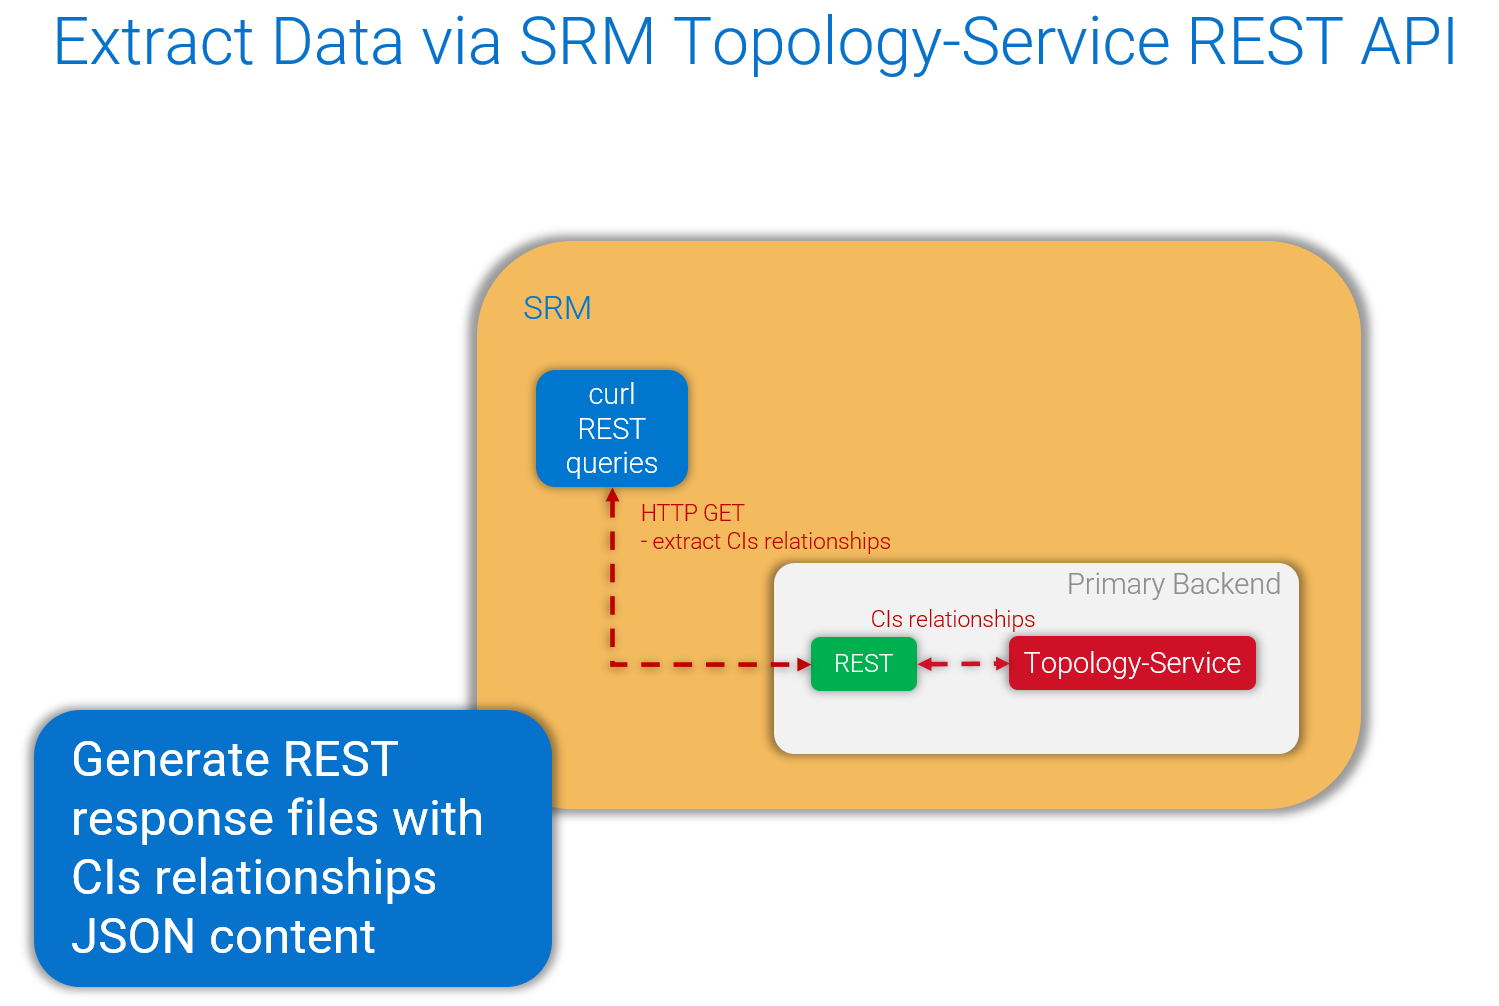 This diagram shows how to extract data via the SRM Topology-Service REST API, which generates REST response files with CIs JSON content